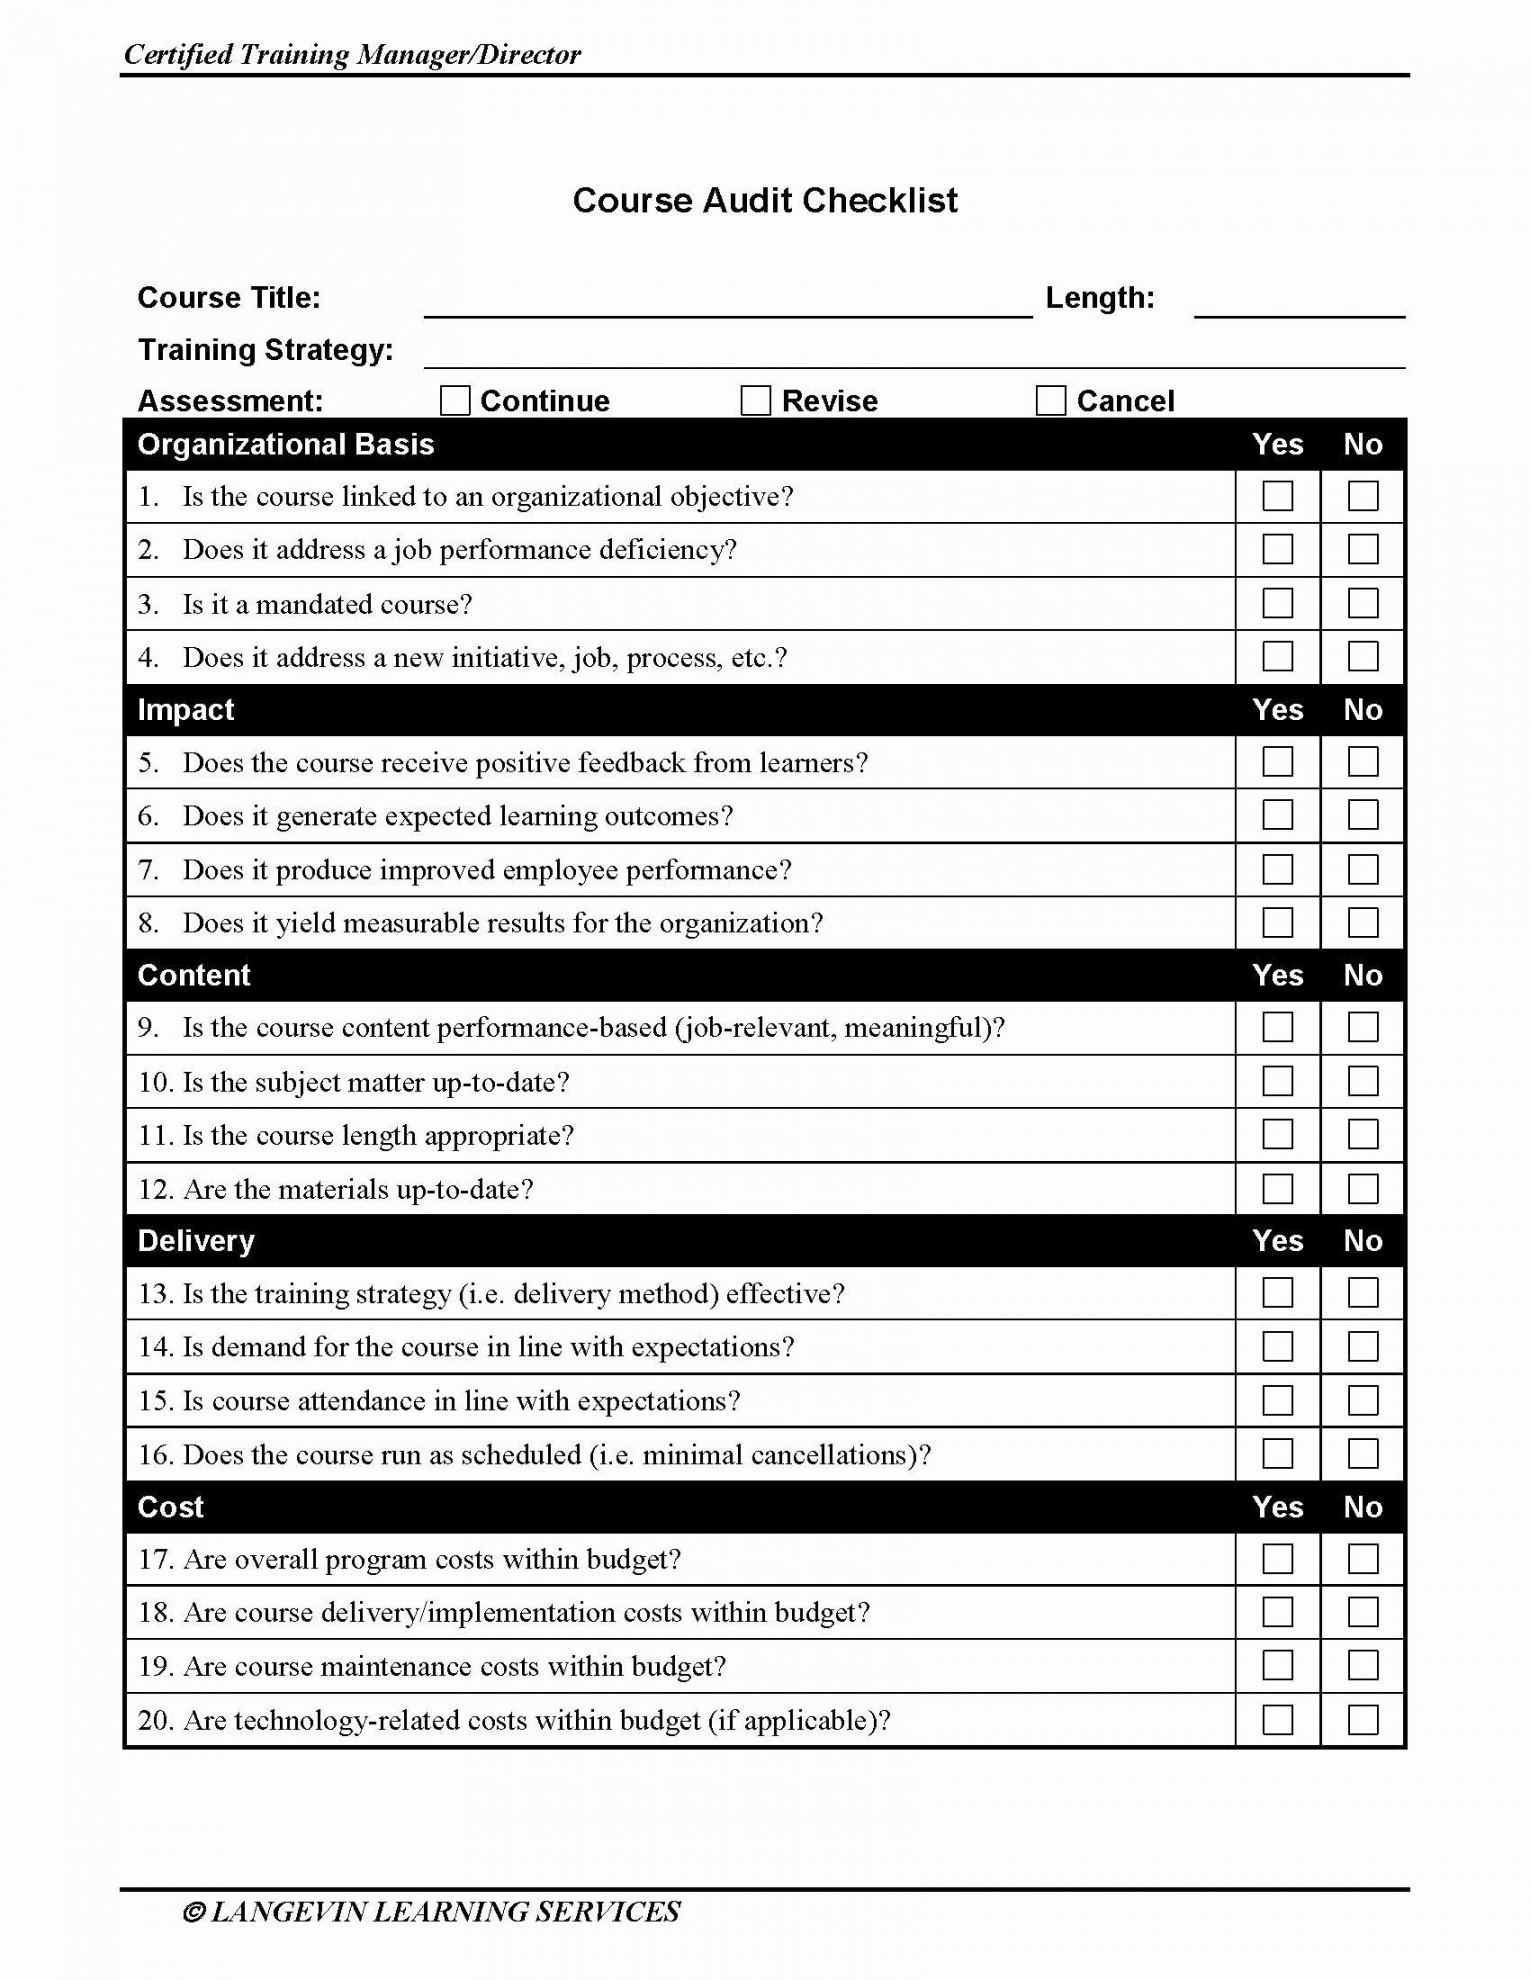 software training plan template fresh course audit checklist training course agenda template doc